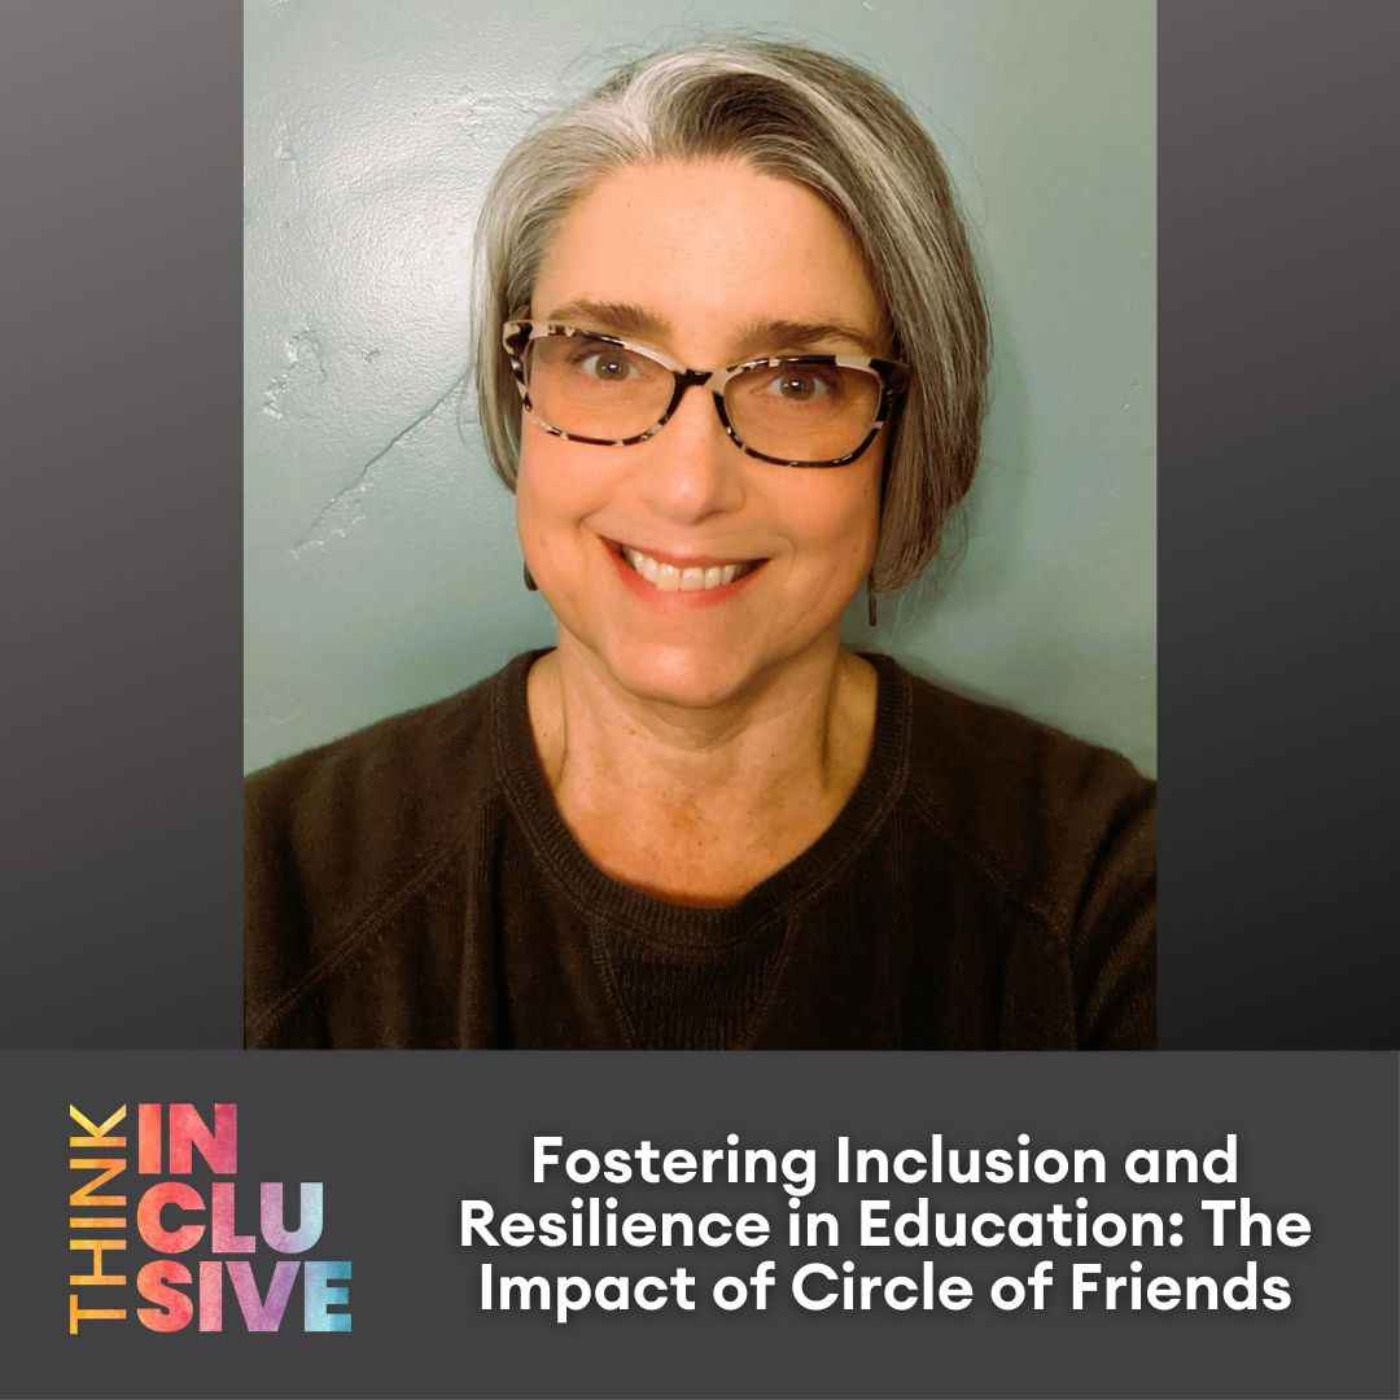 Fostering Inclusion and Resilience in Education: The Impact of Circle of Friends